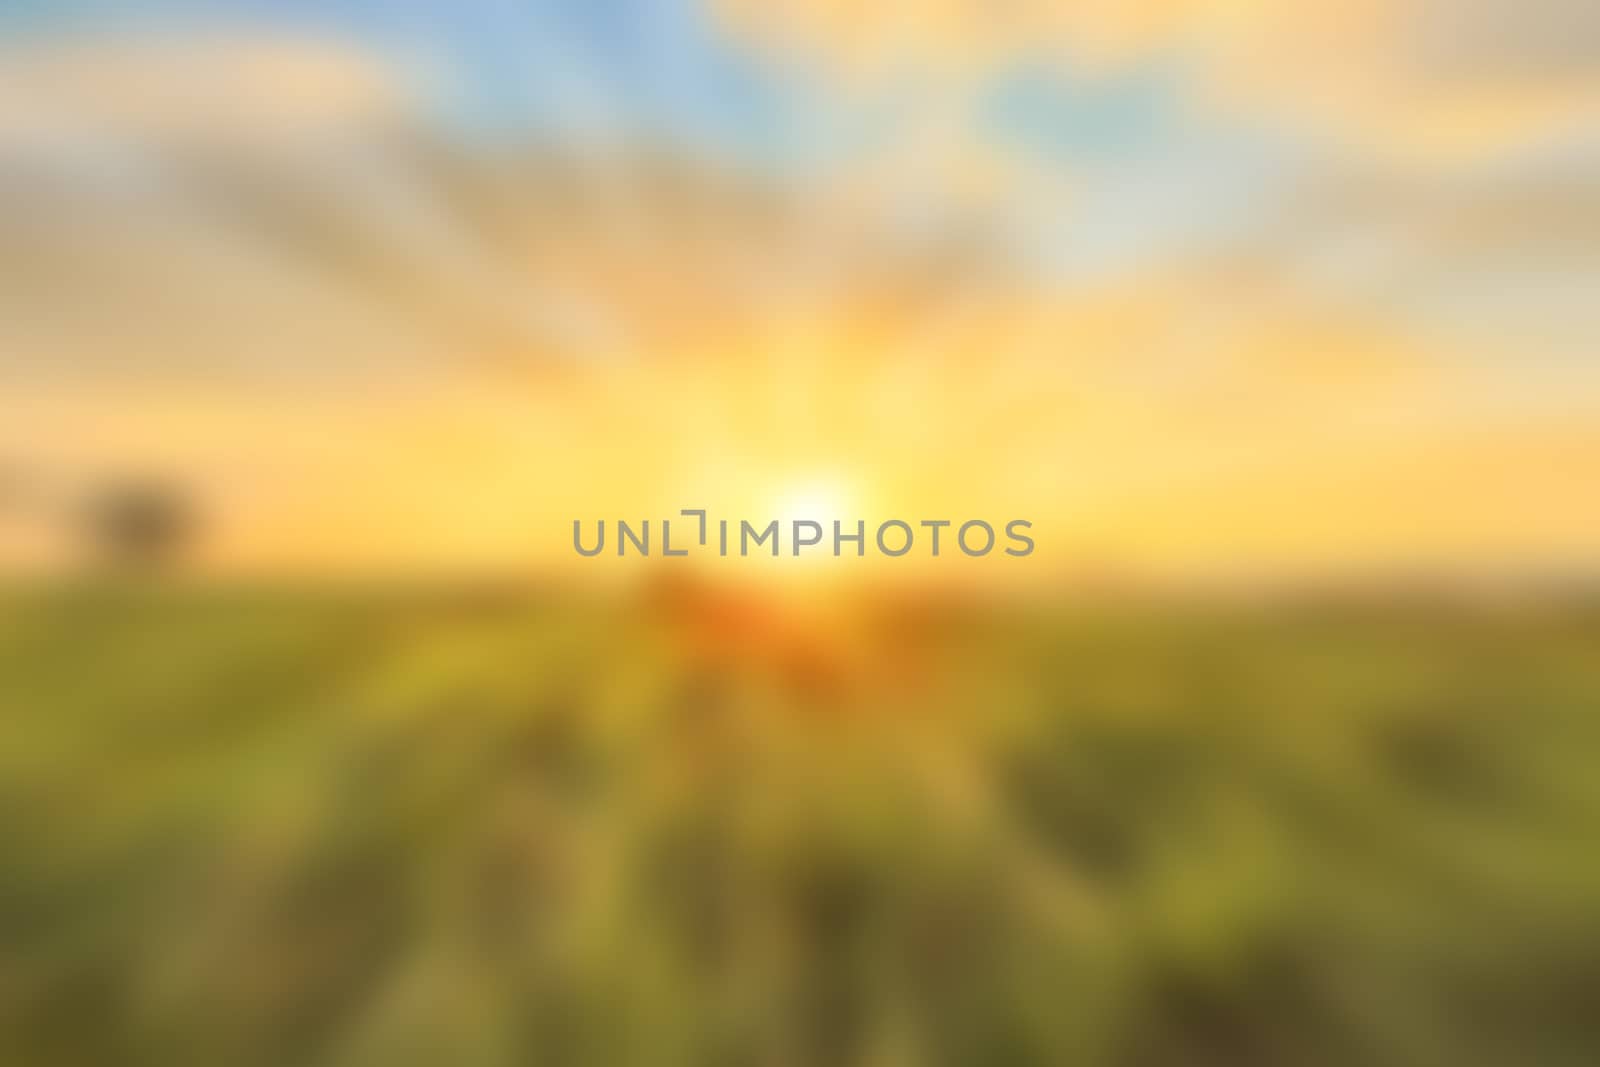 Sunset Artistic blur style - De focused urban abstract texture background for your design 